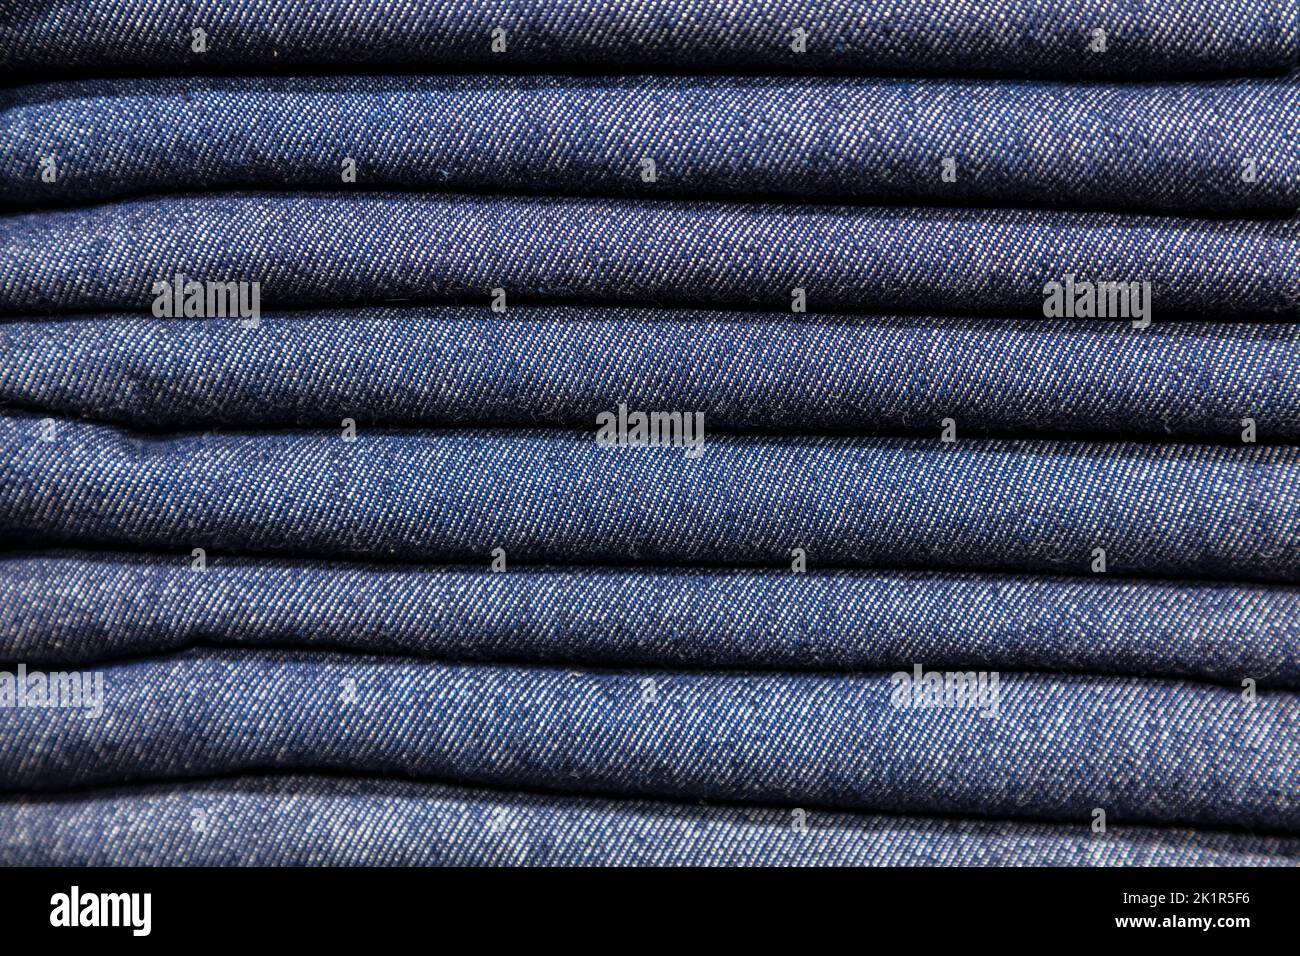 Close up stack of blue denim jeans on display in a clothes shop or store Stock Photo